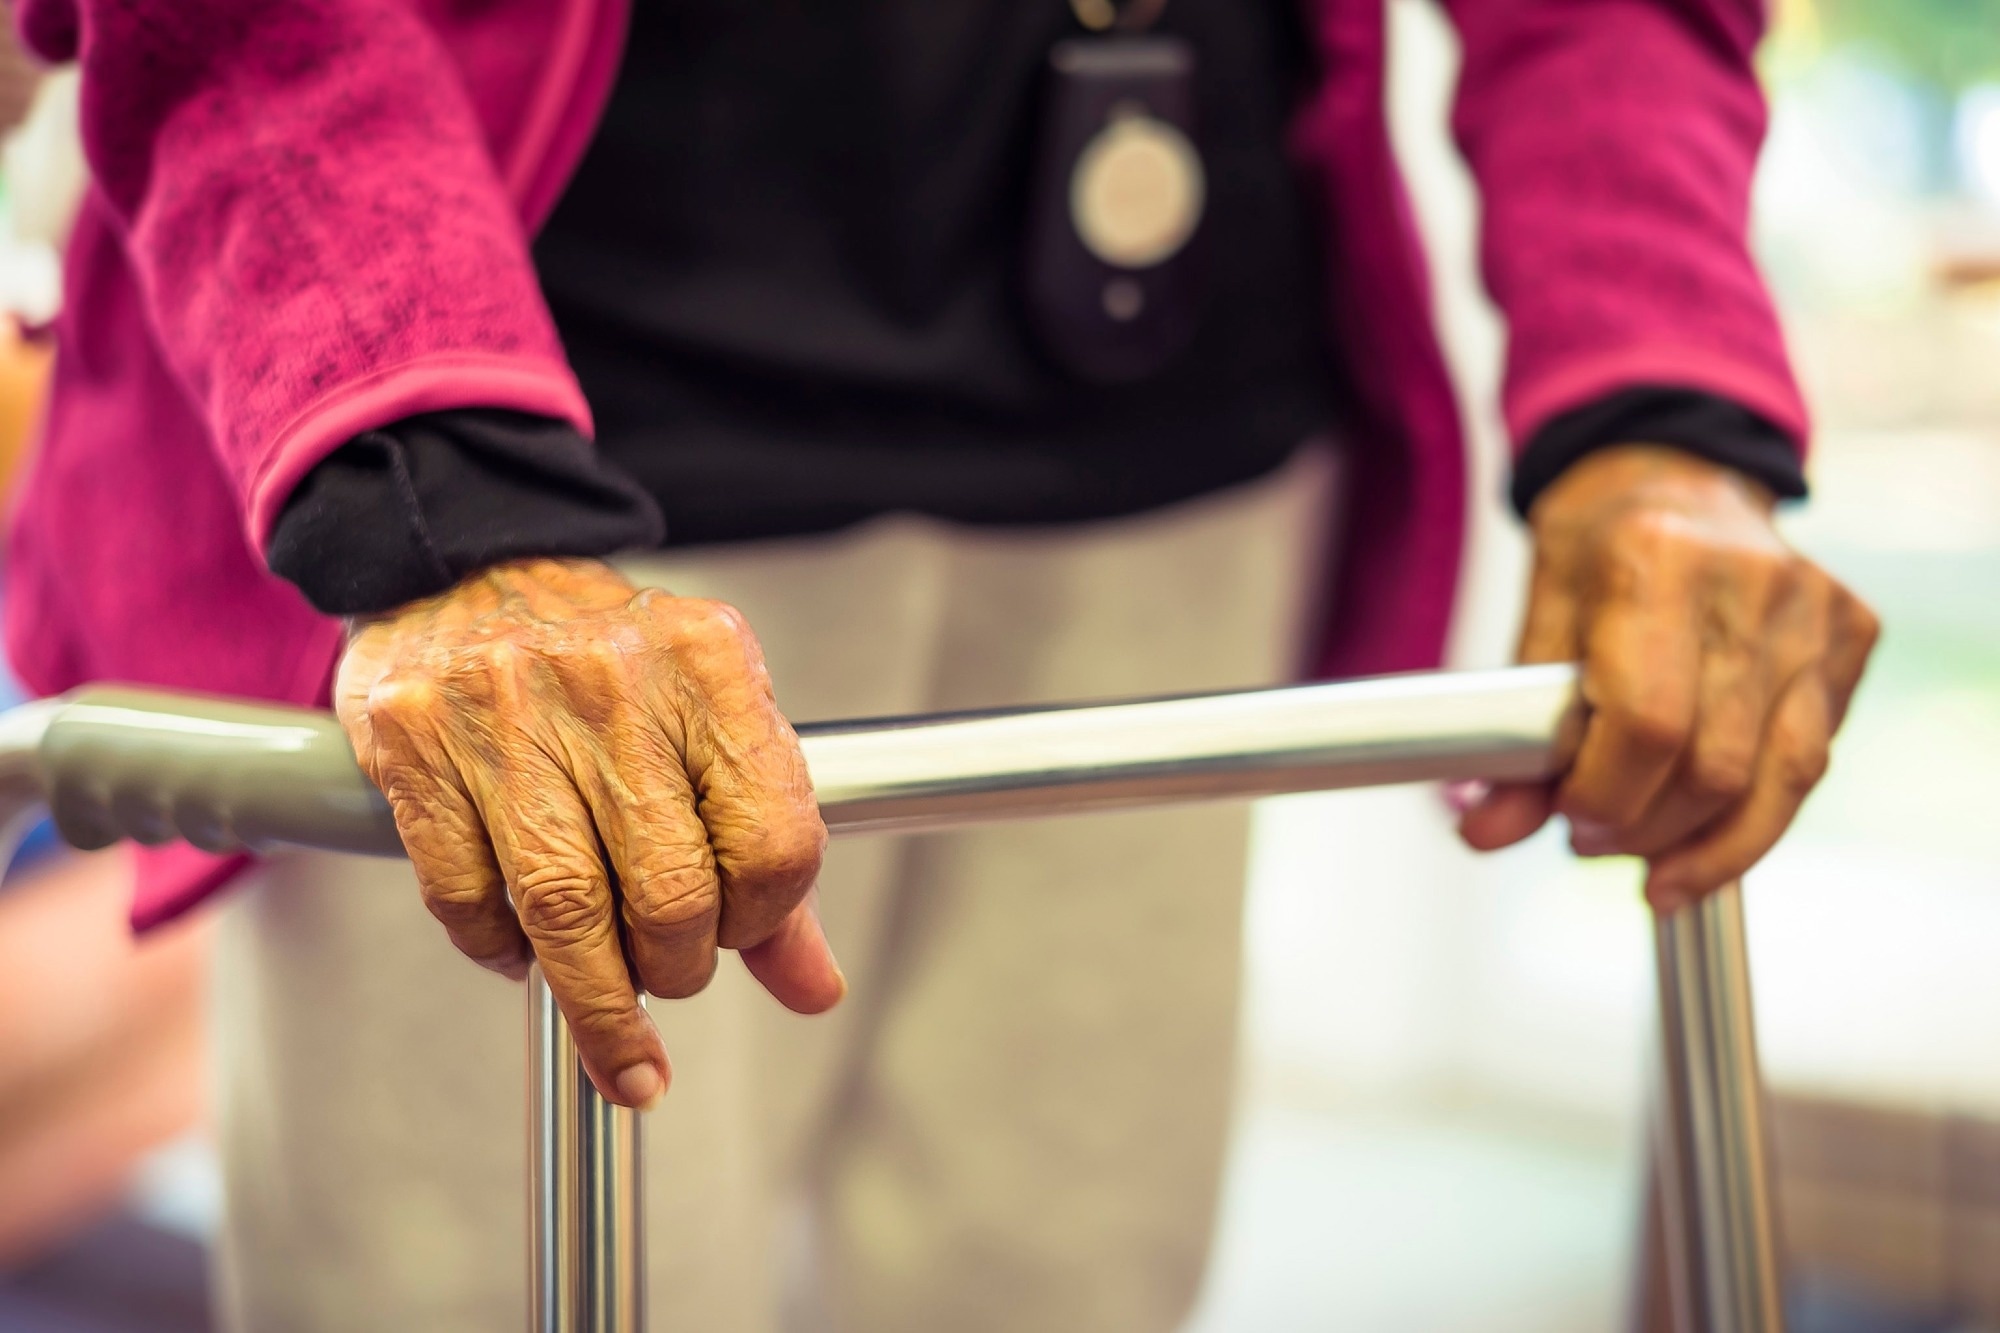 Study: The relationship between frailty and social vulnerability: a systematic review. Image Credit: Paul Maguire / Shutterstock